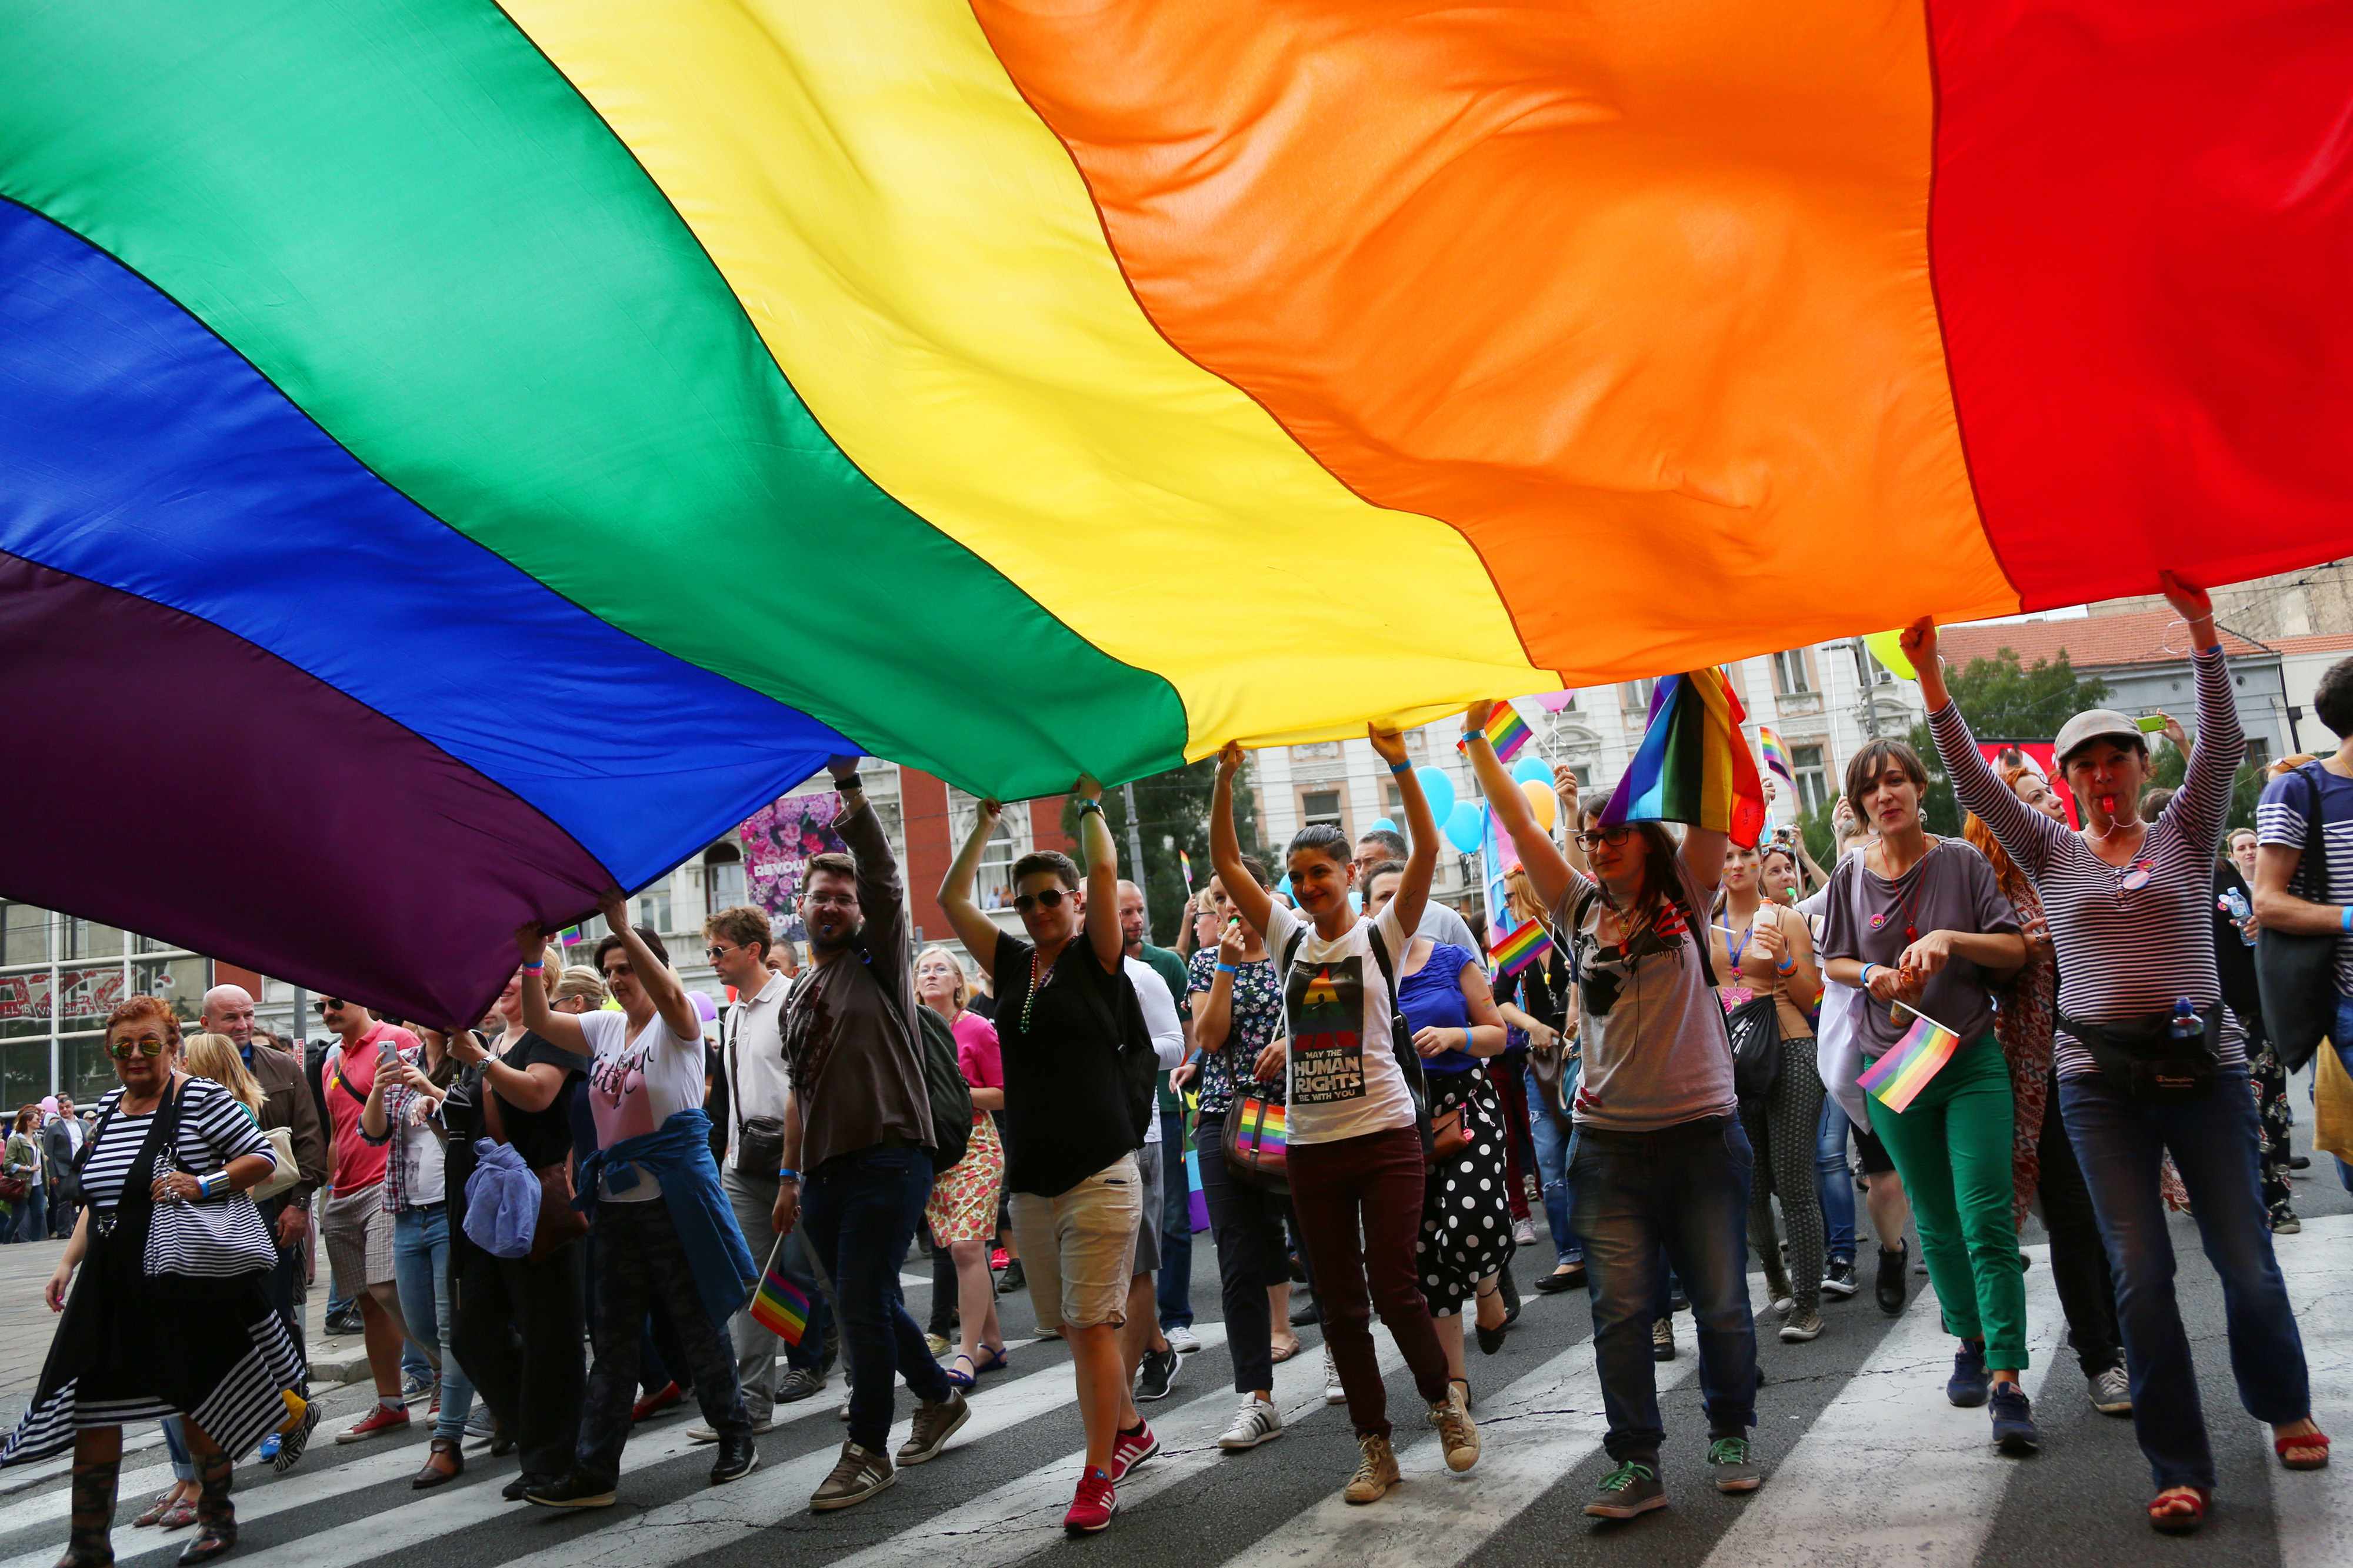 a group of smiling people in a Gay Pride parade, holding a large rainbow banner